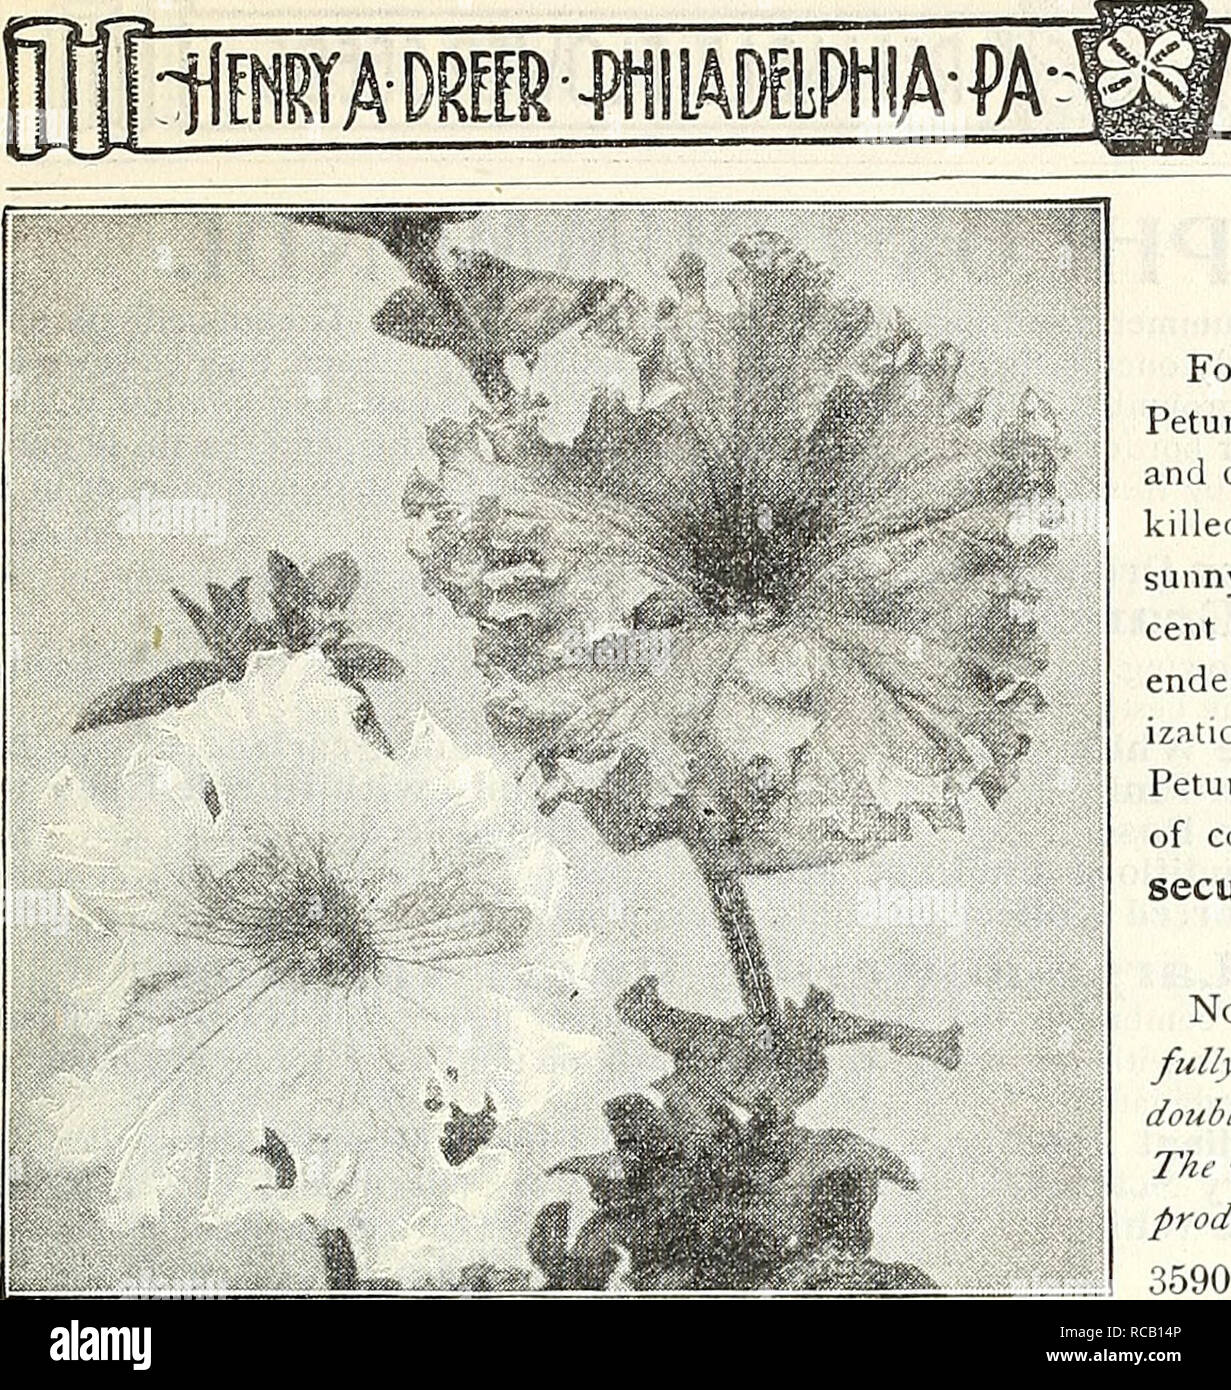 . Dreer's garden book : 1905. Seeds Catalogs; Nursery stock Catalogs; Gardening Equipment and supplies Catalogs; Flowers Seeds Catalogs; Vegetables Seeds Catalogs; Fruit Seeds Catalogs. R[LIABlE'FLOWERSEED 91 PETUNIA. Drker's Superb Large-Flowering Single-Fringeu Pehinias. SINGI.E VARIETIESo Note what we say in refer- ence to saving the weaker seed- lings of the double -.flowering varieties ; the same is true in a measure of the single sorts. PER PKT. 3580 Dreer's Superb Large = flowering Fringed. Our own saving from finest flowers, of very large size and beautiful shape, deep-throated, and of Stock Photo